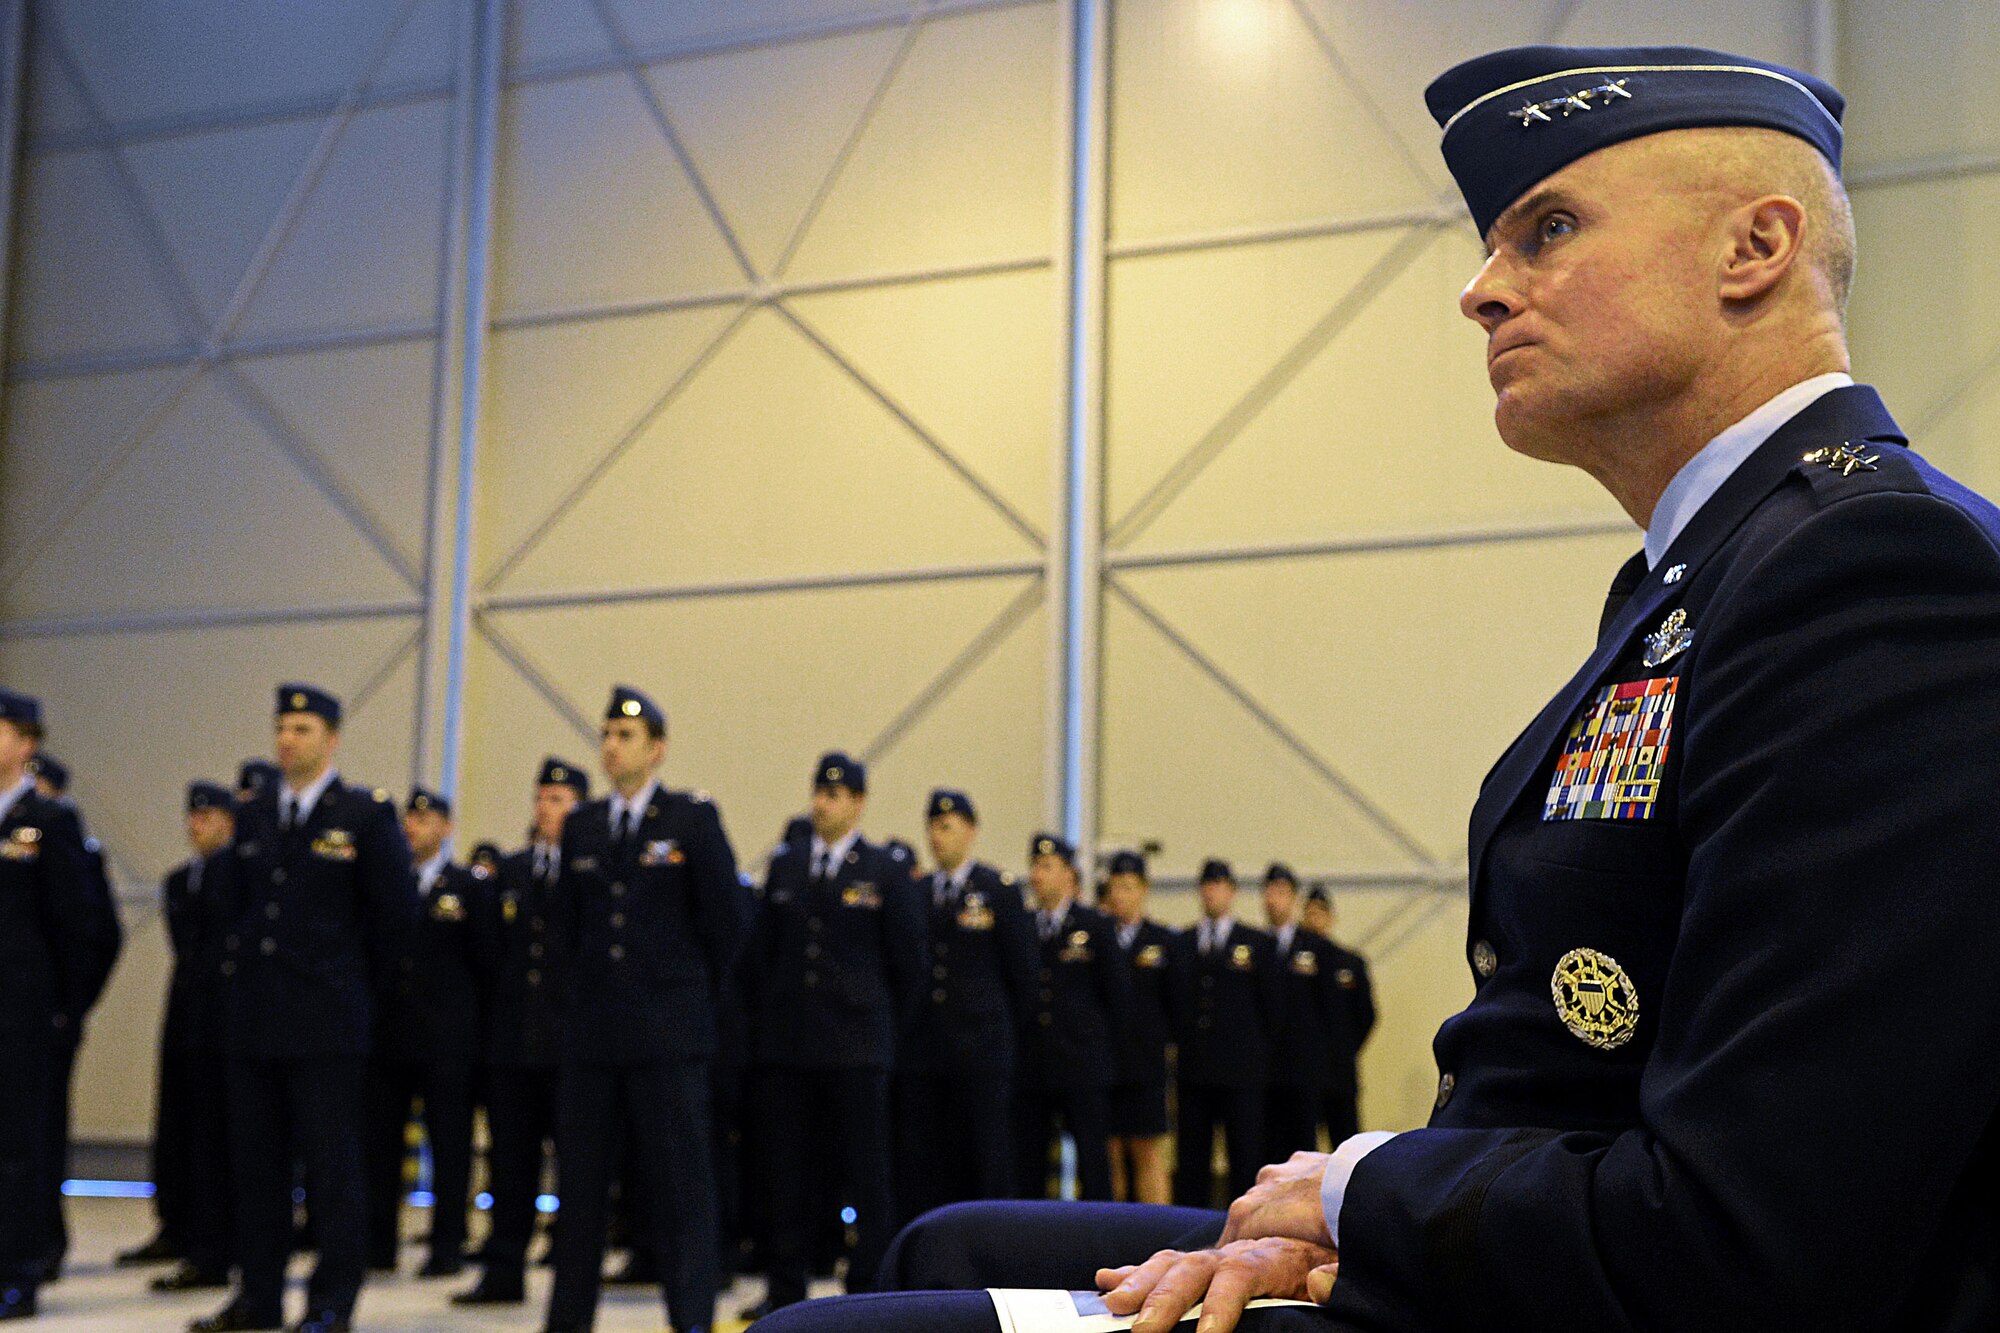 Lt. Gen. Craig Franklin, 3rd Air Force commander, listens during a memorial service on Aviano Air Base, Italy, Feb. 6, 2013. Approximately 1,000 people attended the memorial service for Gruenther, who past away when his F-16 went down over the Adriatic Sea Jan. 28. (U.S. Air Force photo/Airman 1st Class Matthew Lotz)